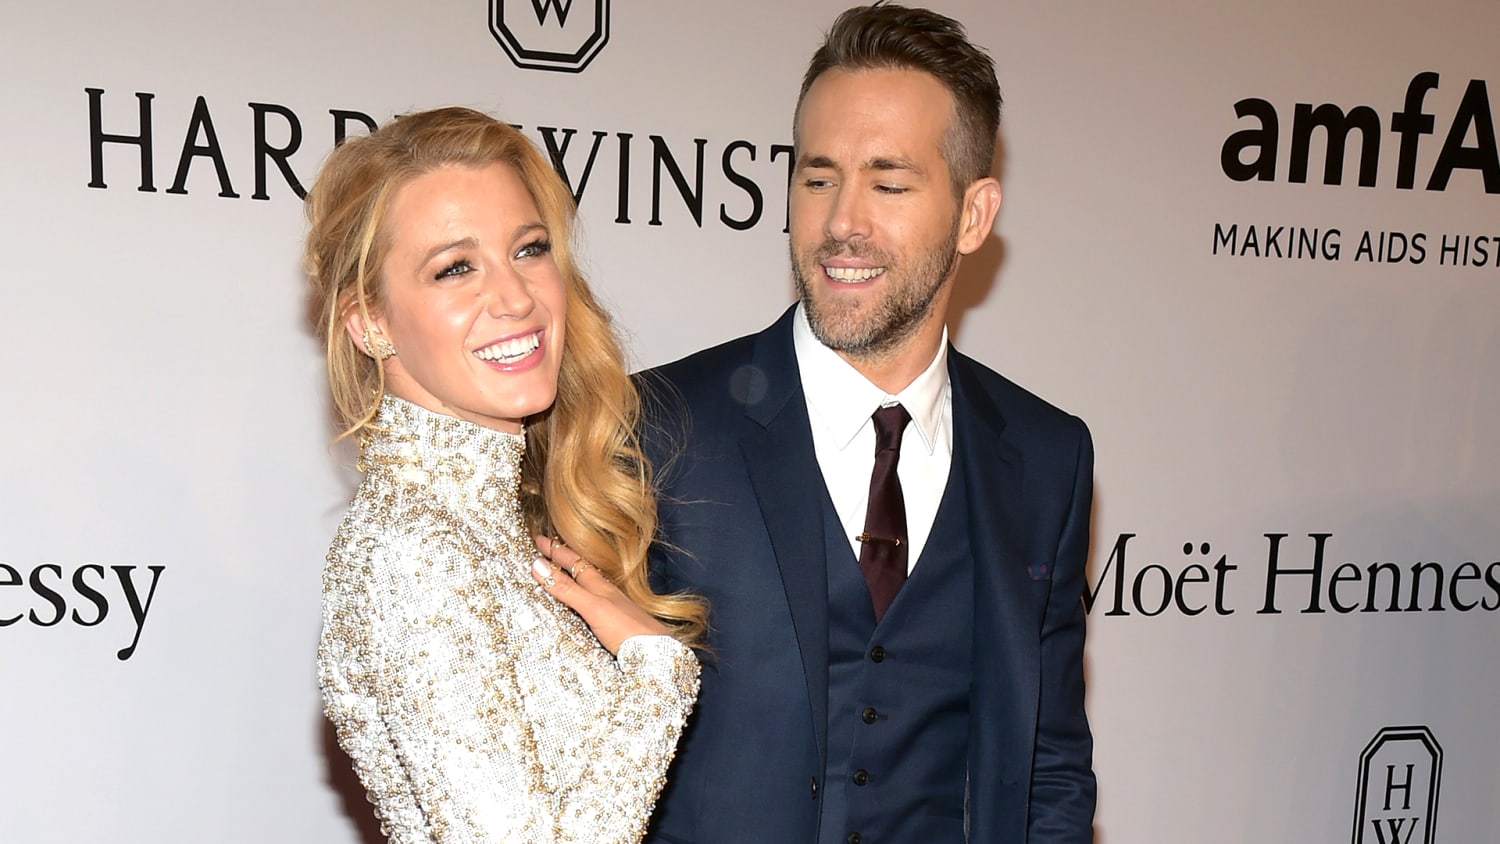 Blake Lively opens up about Ryan Reynolds as a dad - TODAY.com